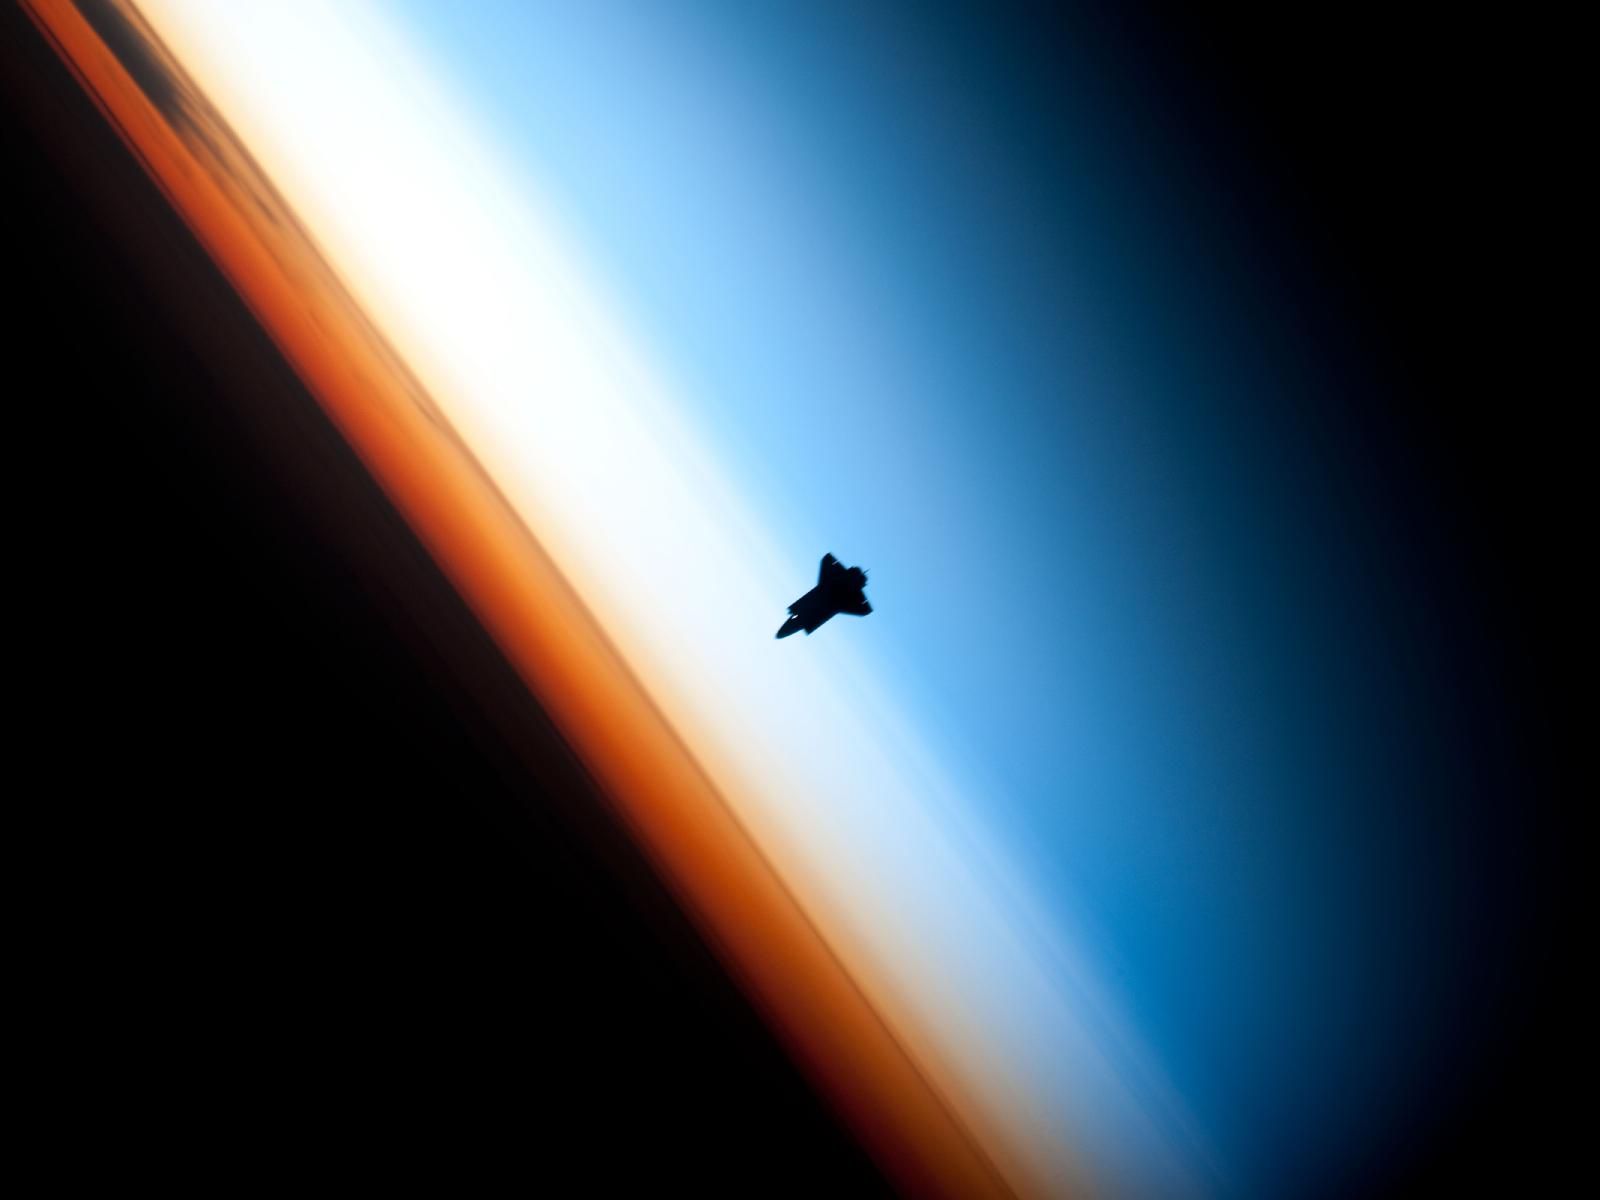 Space shuttle Endeavor as it entered the earth’s atmosphere on February 9,